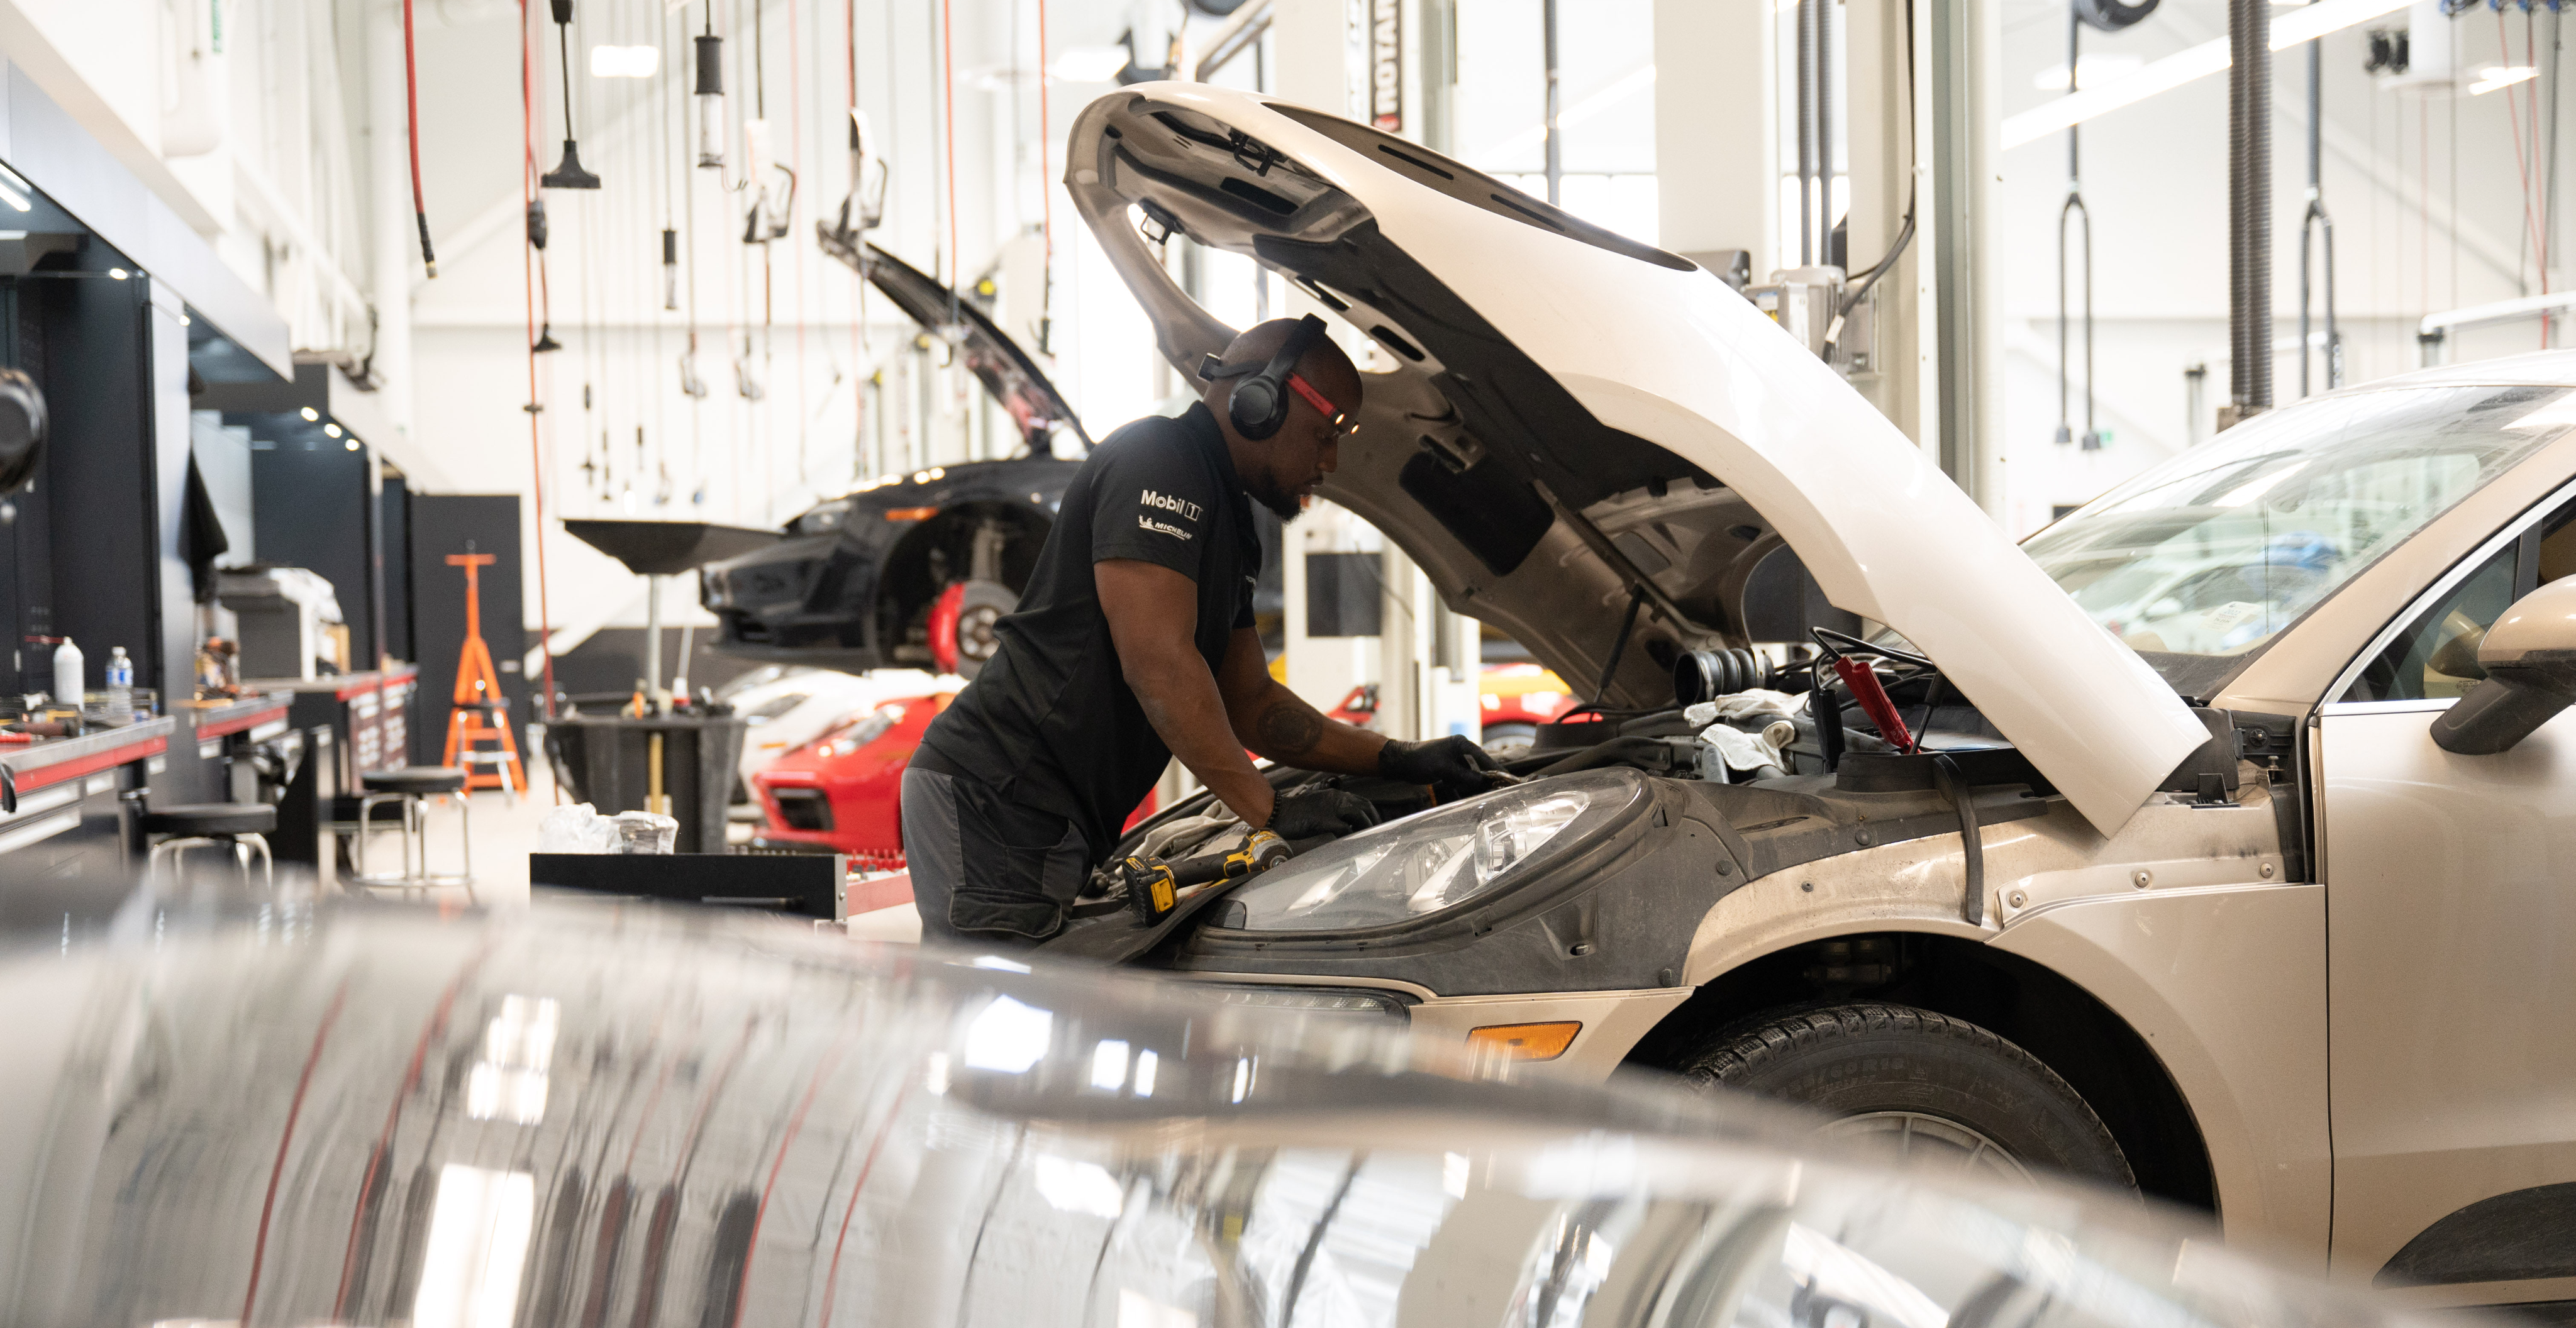 Technician checking the hood of a car in a service department